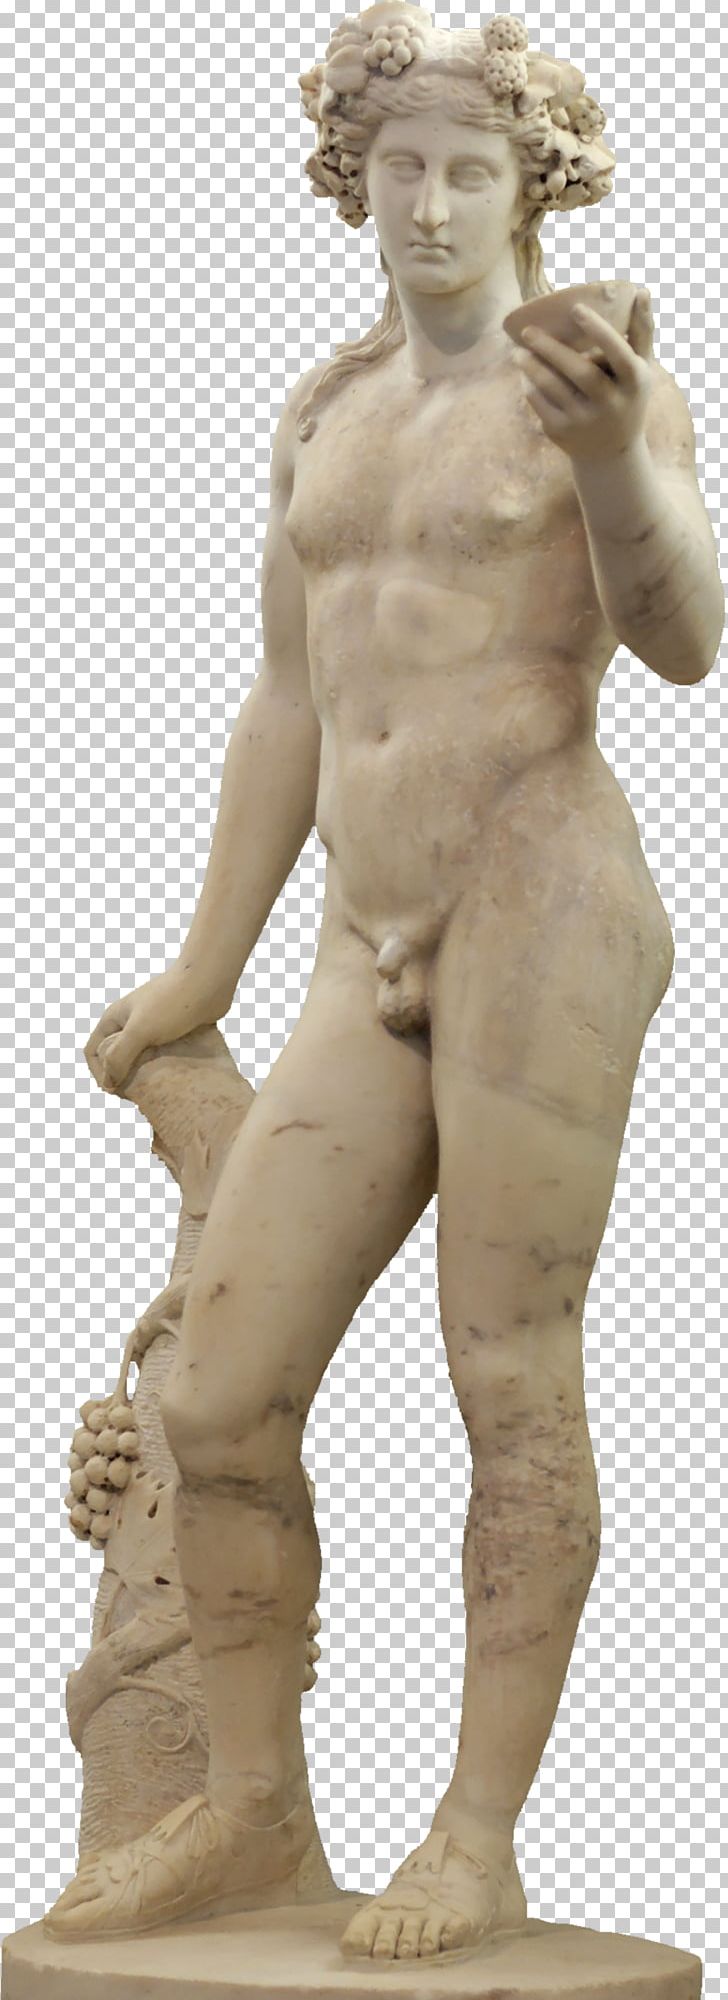 Zeus Semele Dionysus Hera Greek Mythology PNG, Clipart, Ancient Greece, Ancient Greek Religion, Ancient History, Ares, Art Free PNG Download